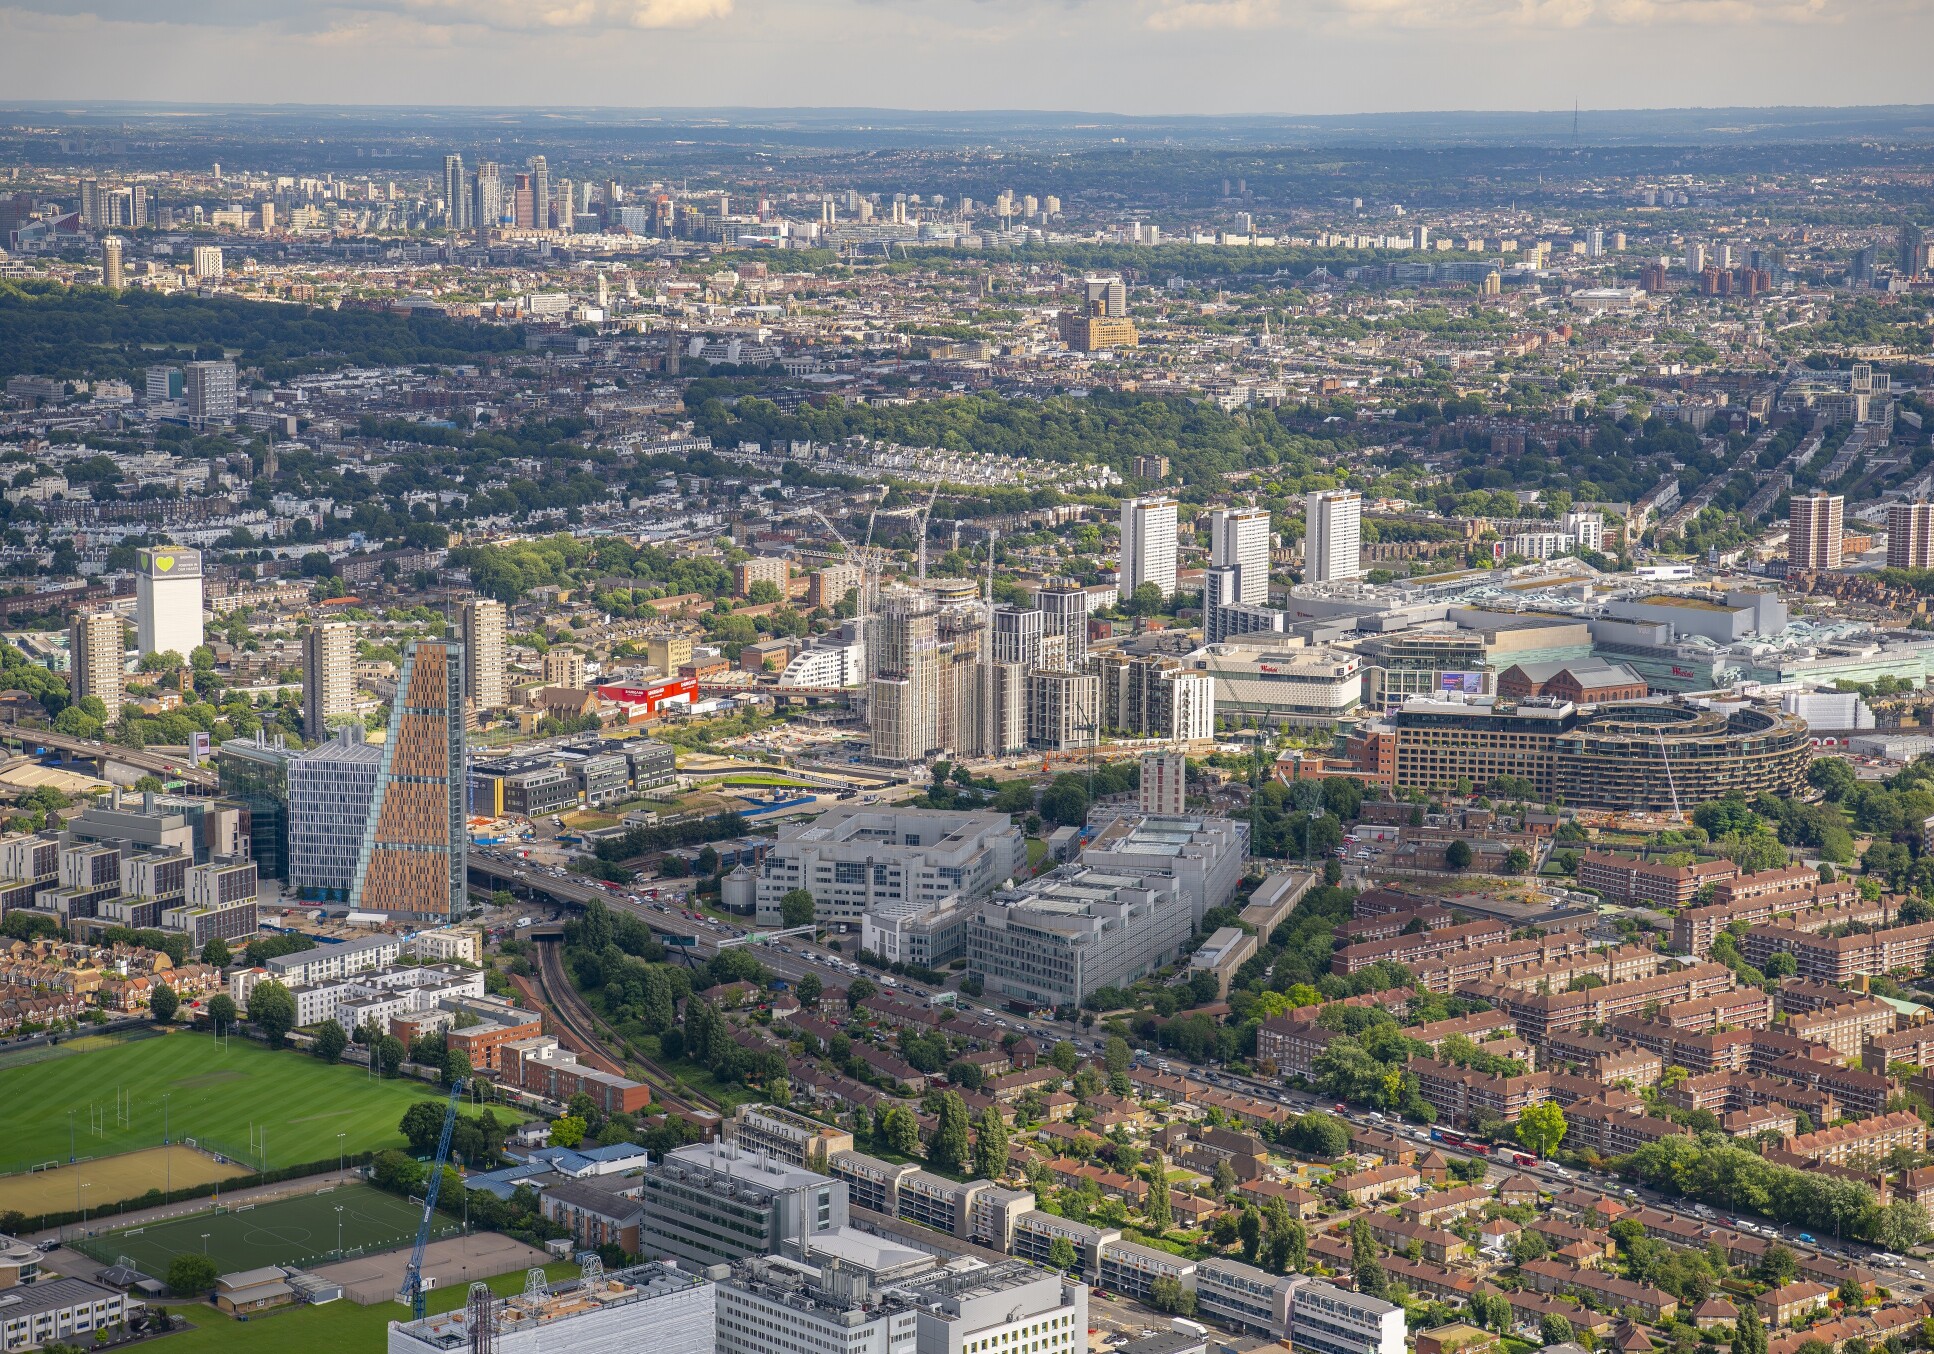 White City from the air